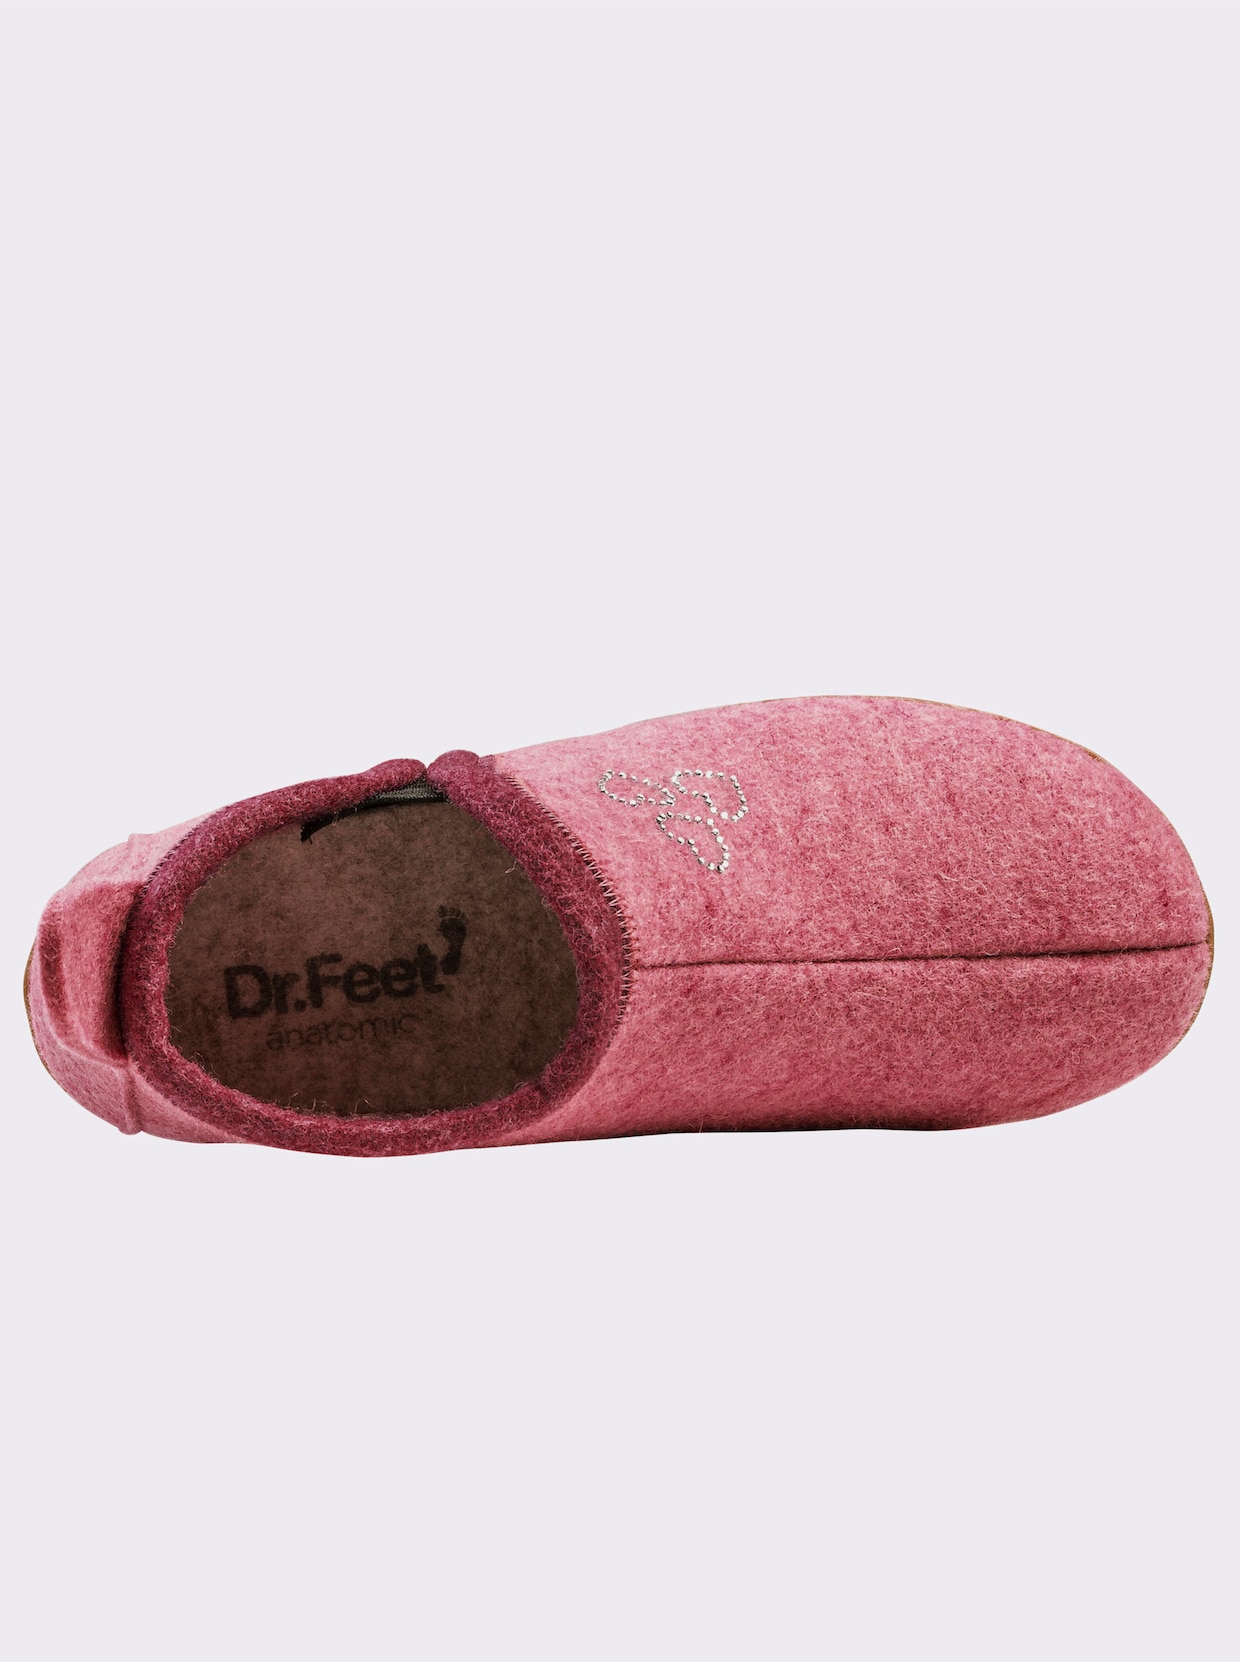 Dr. Feet Chaussons - rose